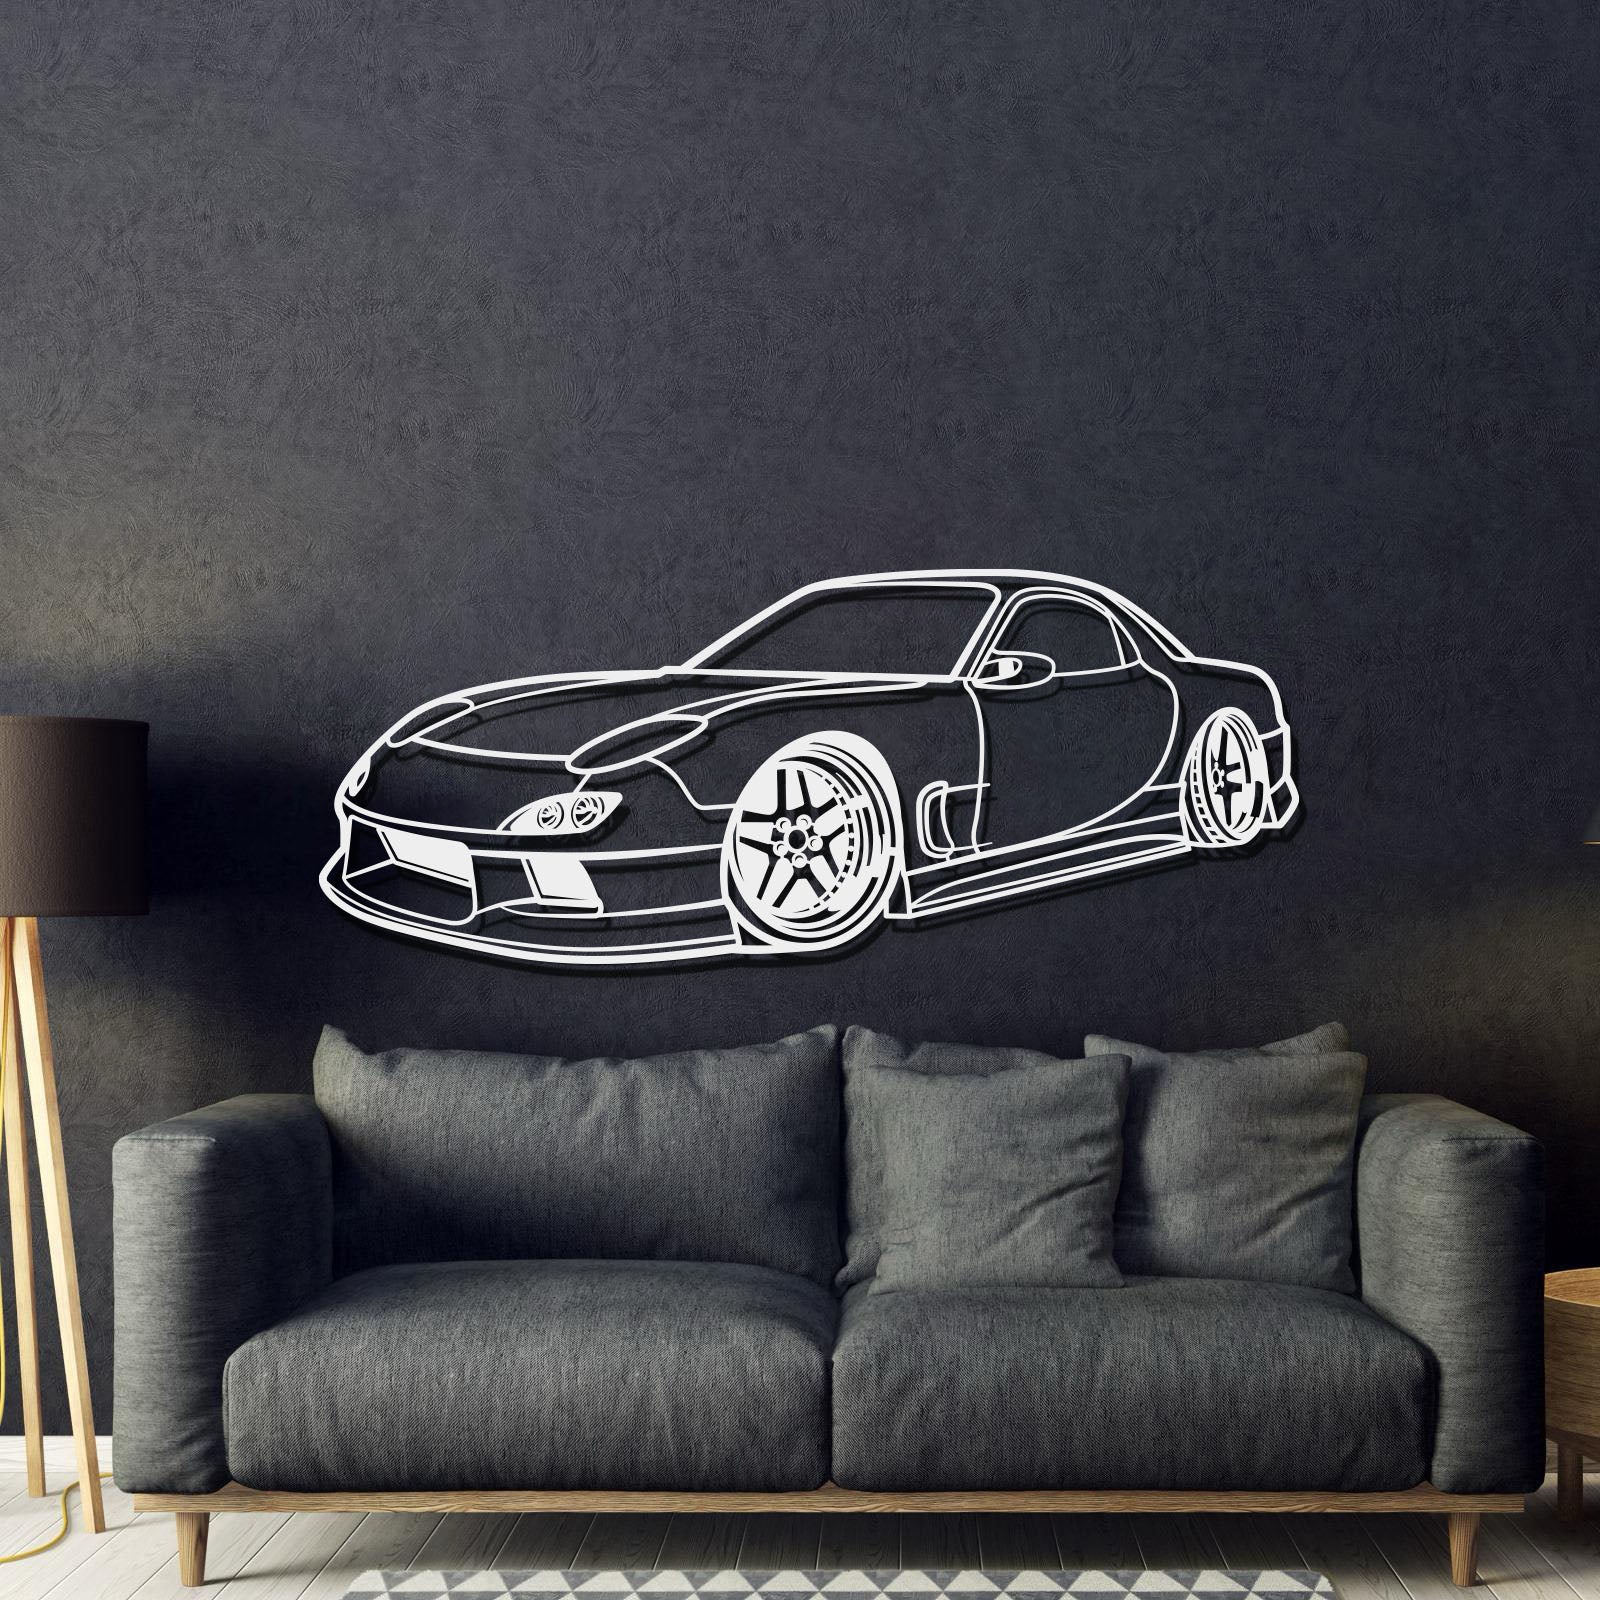 1994 RX-7 Stance Perspective Metal Car Wall Art - MT1170